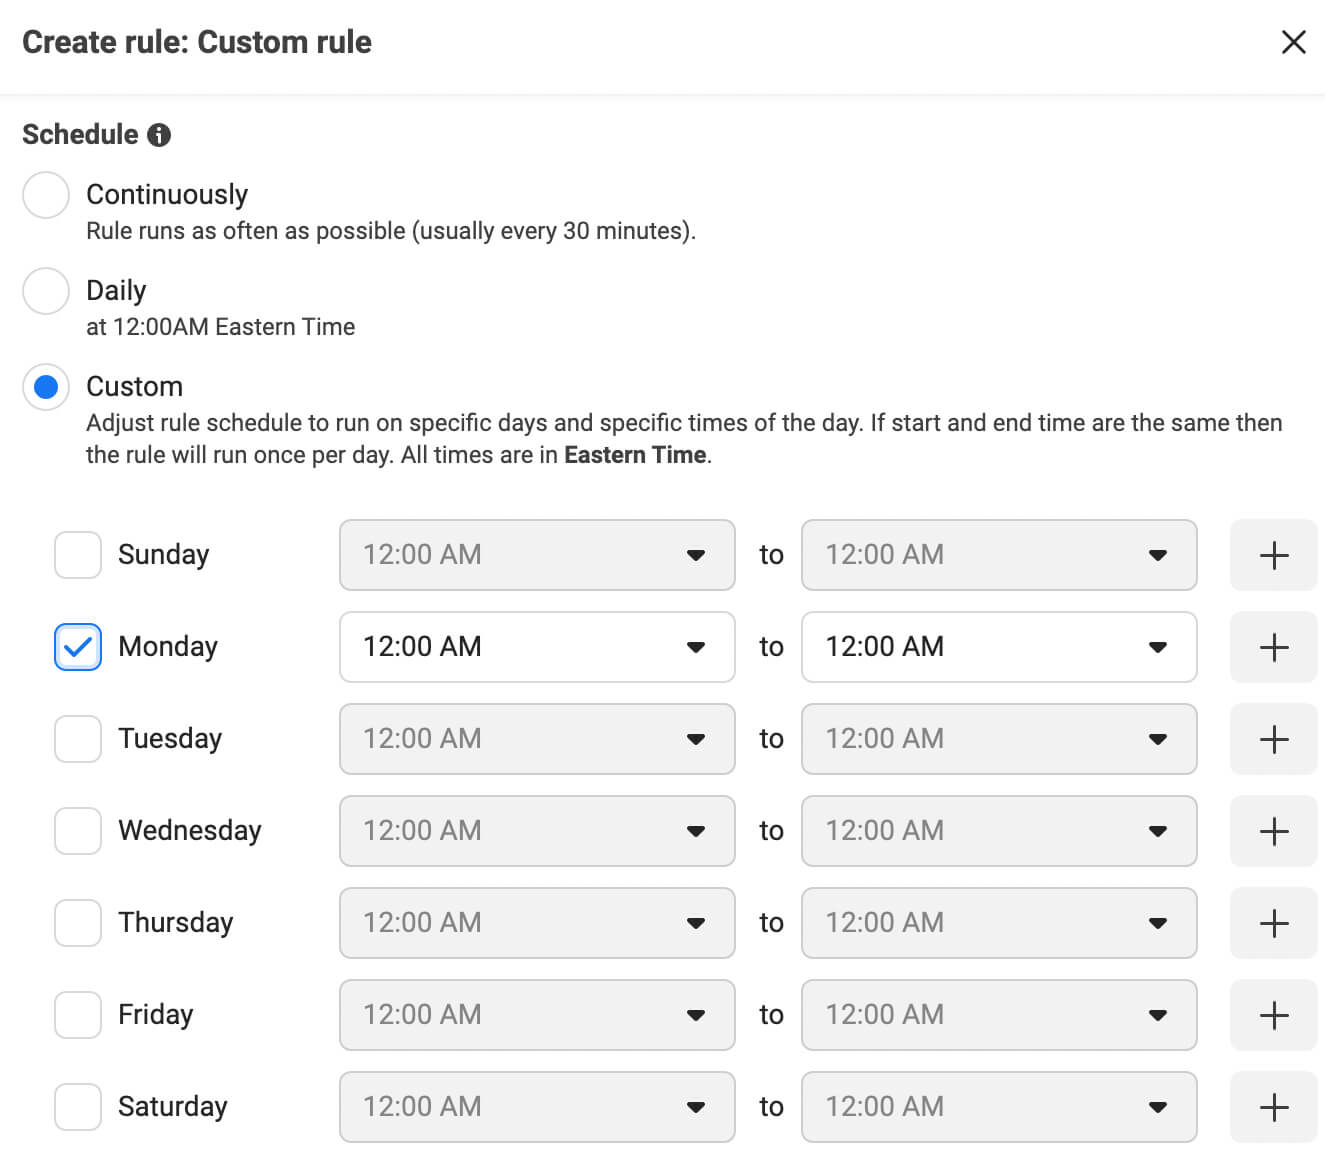 how-to-scale-instagram-ads-automatically-create-custom-rule-schedule-example-10